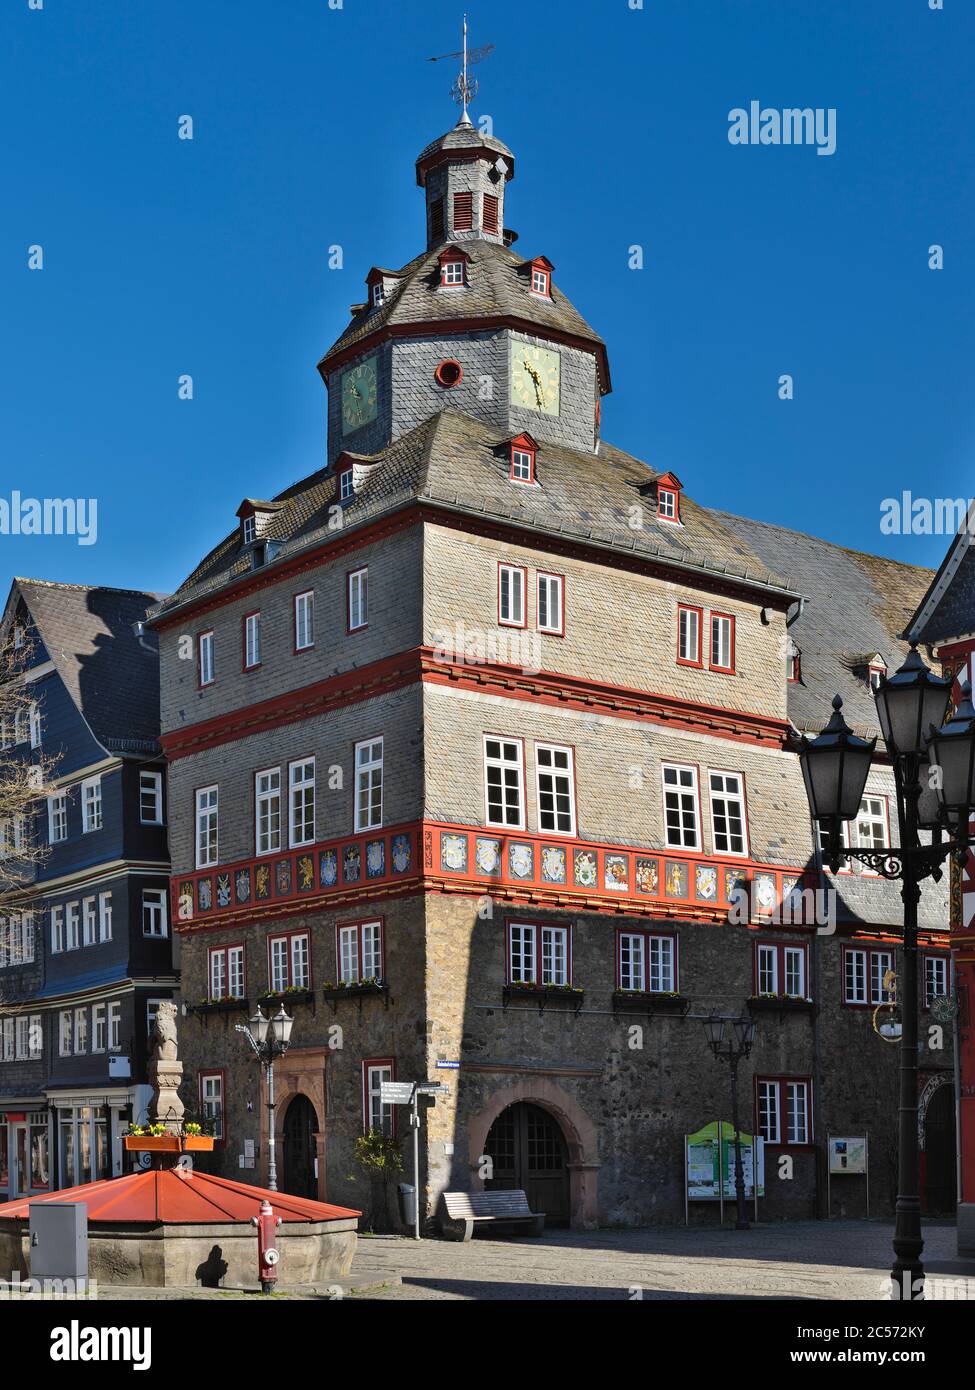 Europe, Germany, Hesse, Lahn-Dill-Bergland Nature Park, city of Herborn, market square with historic town hall and half-timbered houses Stock Photo